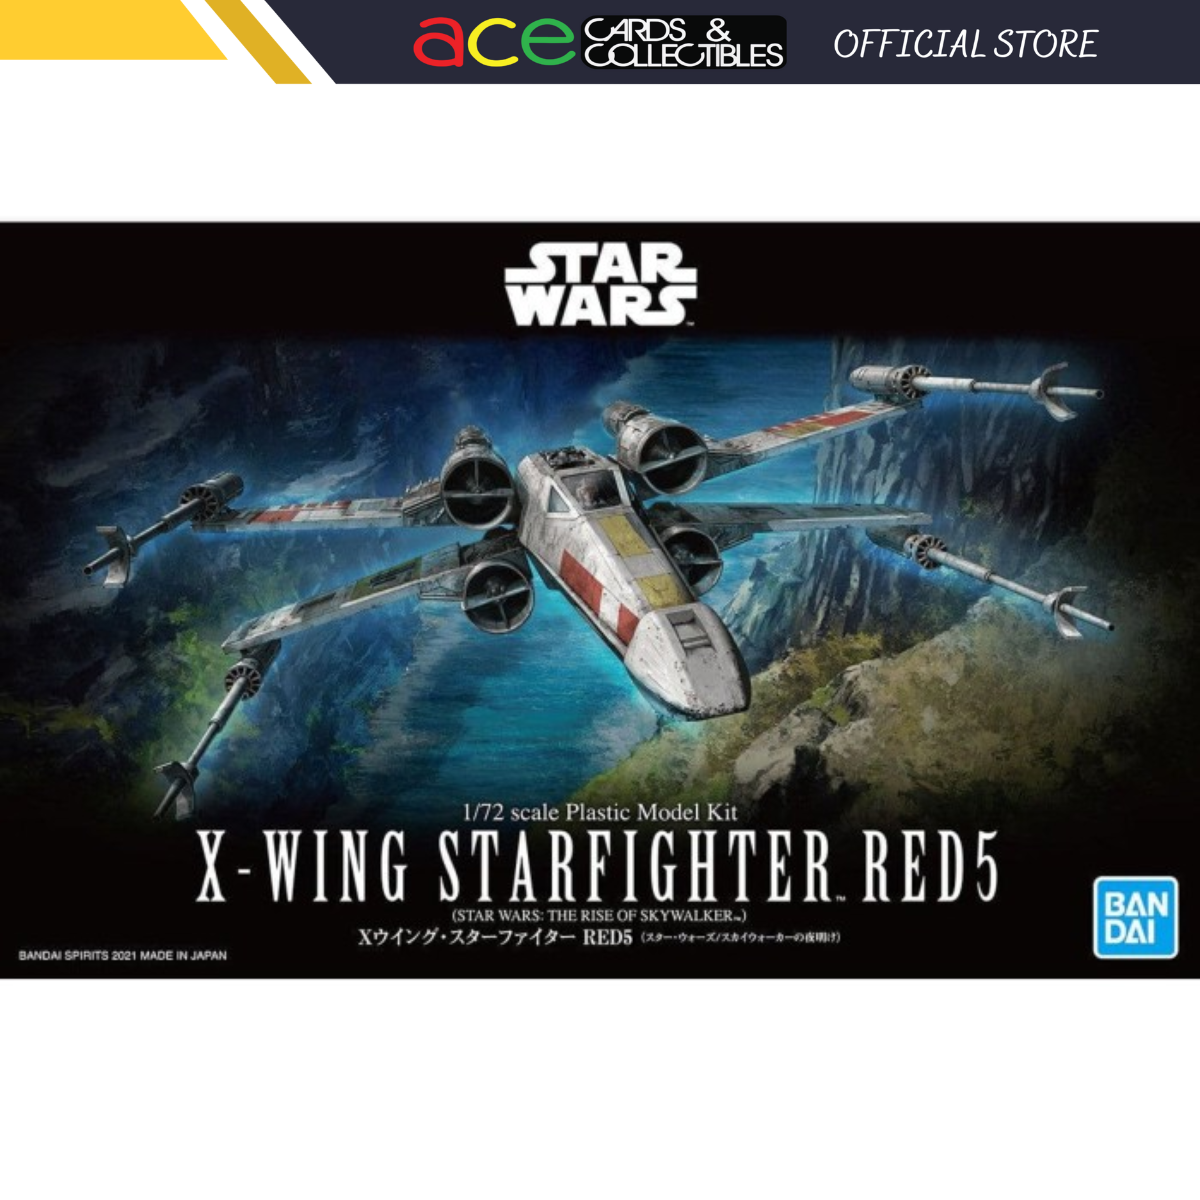 Star Wars Vehicle Model 1/72 X-Wing Starfighter The Rise Of Skywalker-Bandai-Ace Cards & Collectibles